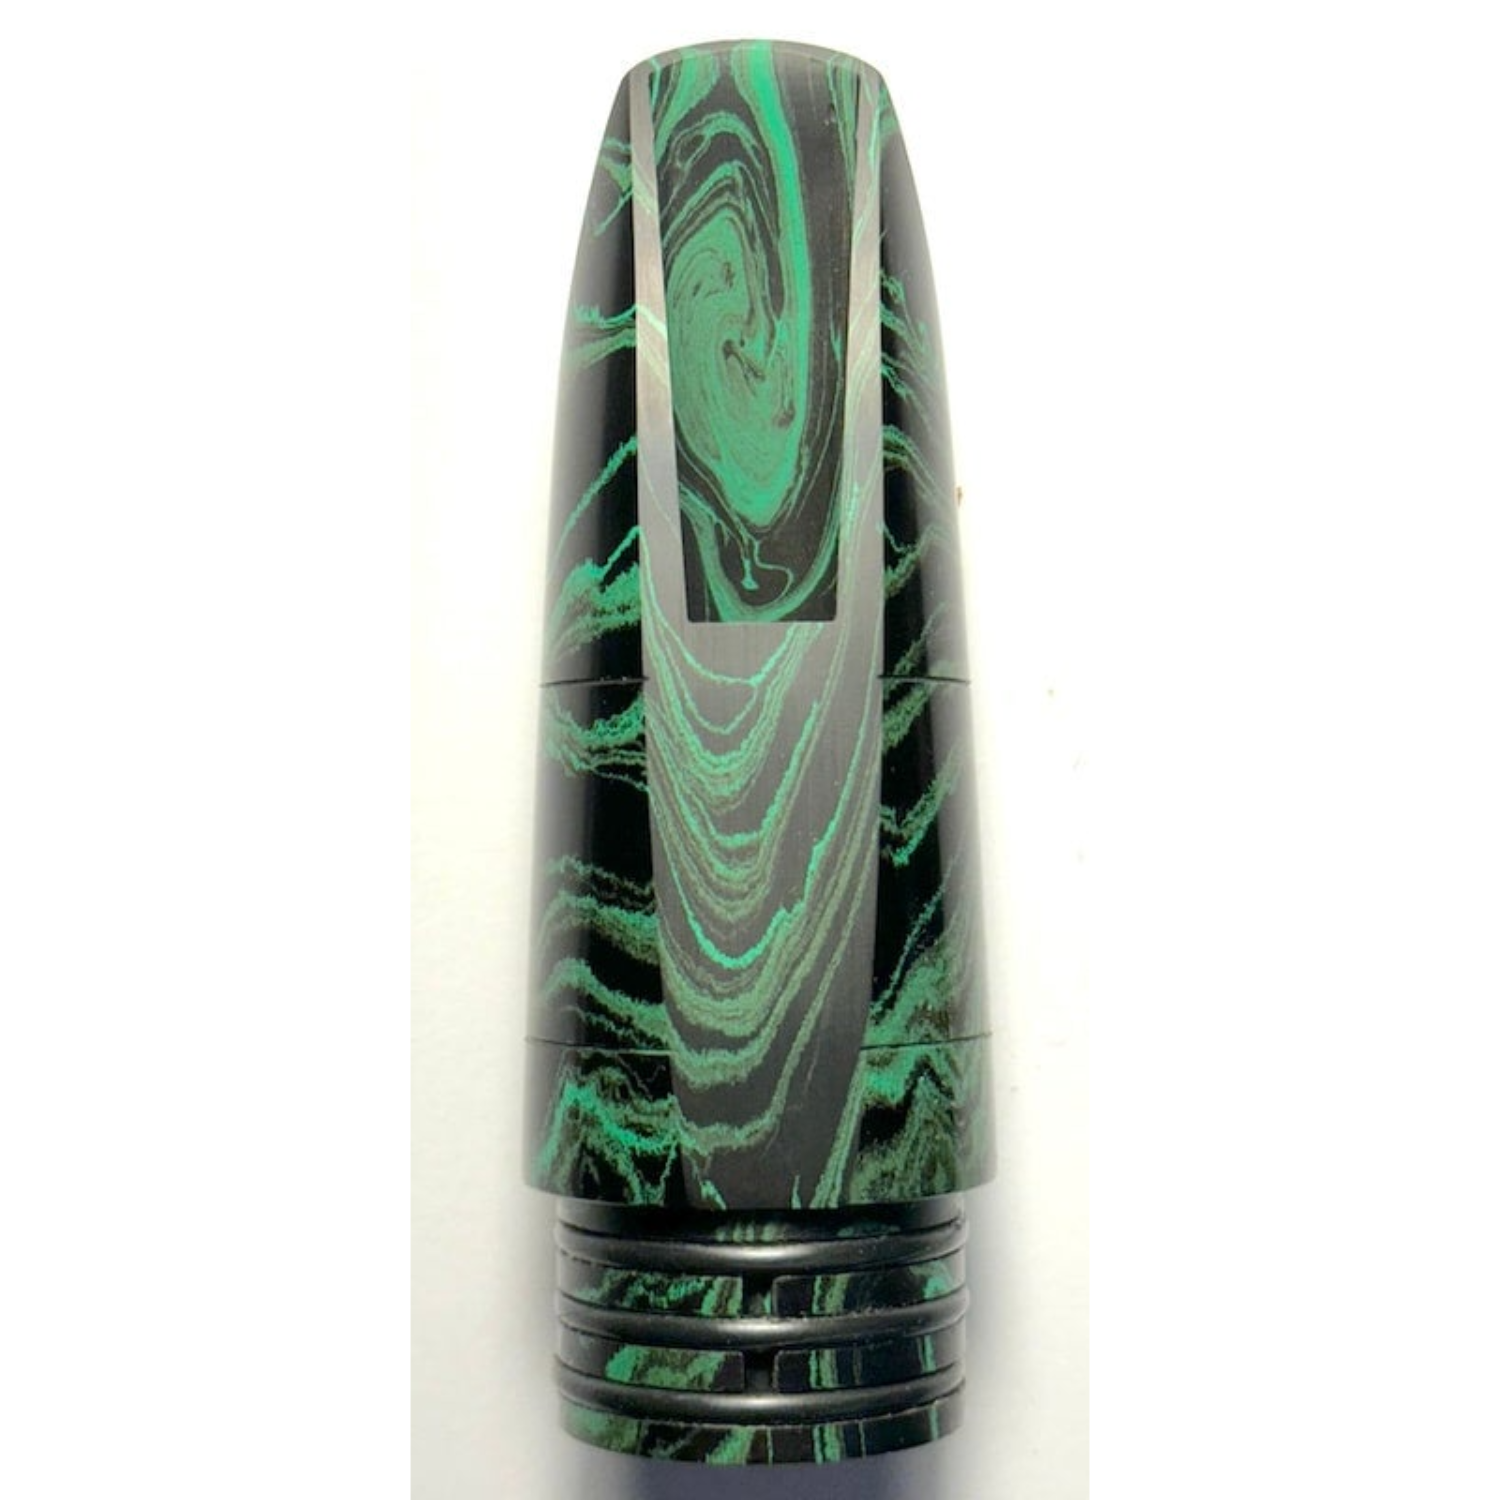 Rear view of Corbin Honu mouthpiece, green and black marbled, showing window and table